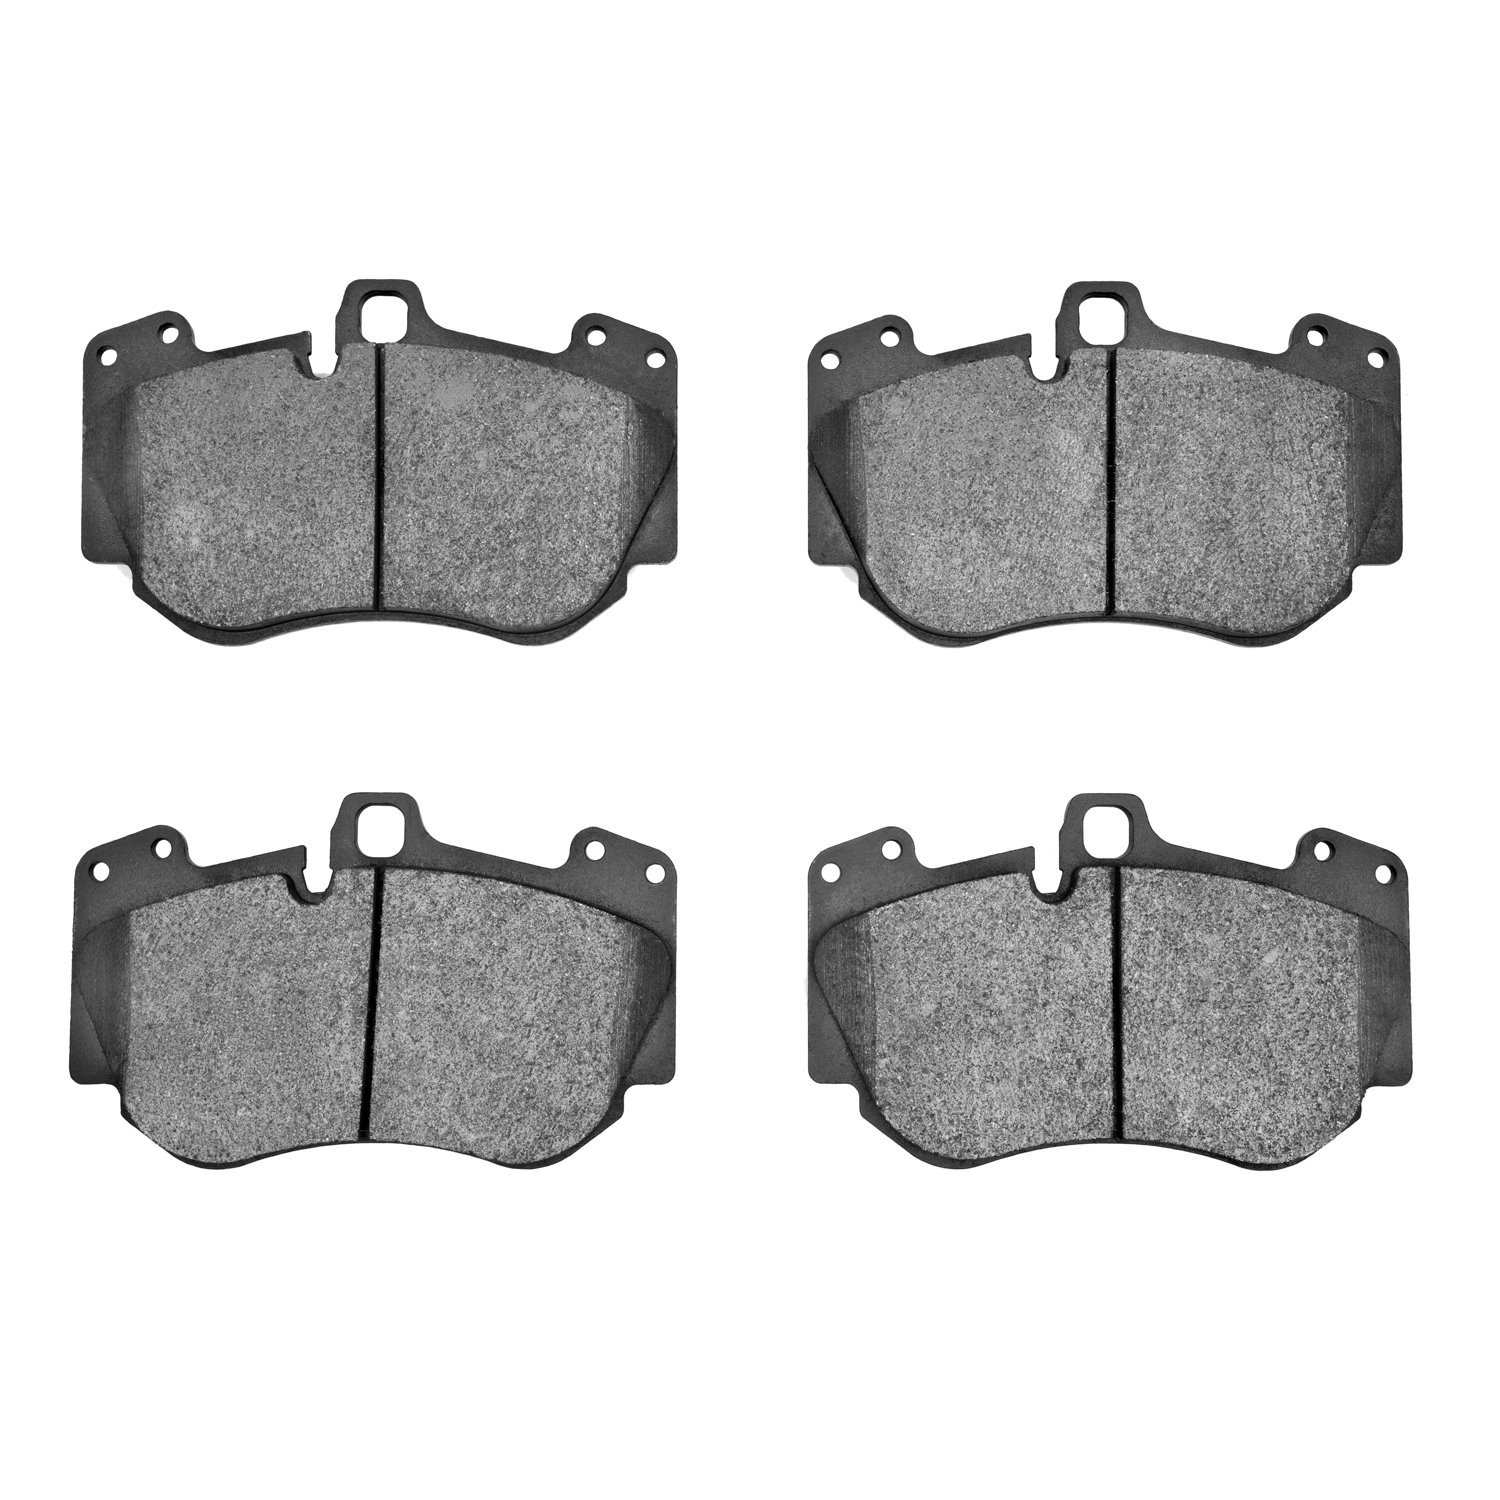 1000-1130-10 Track/Street Low-Metallic Brake Pads Kit, Fits Select Multiple Makes/Models, Position: Front